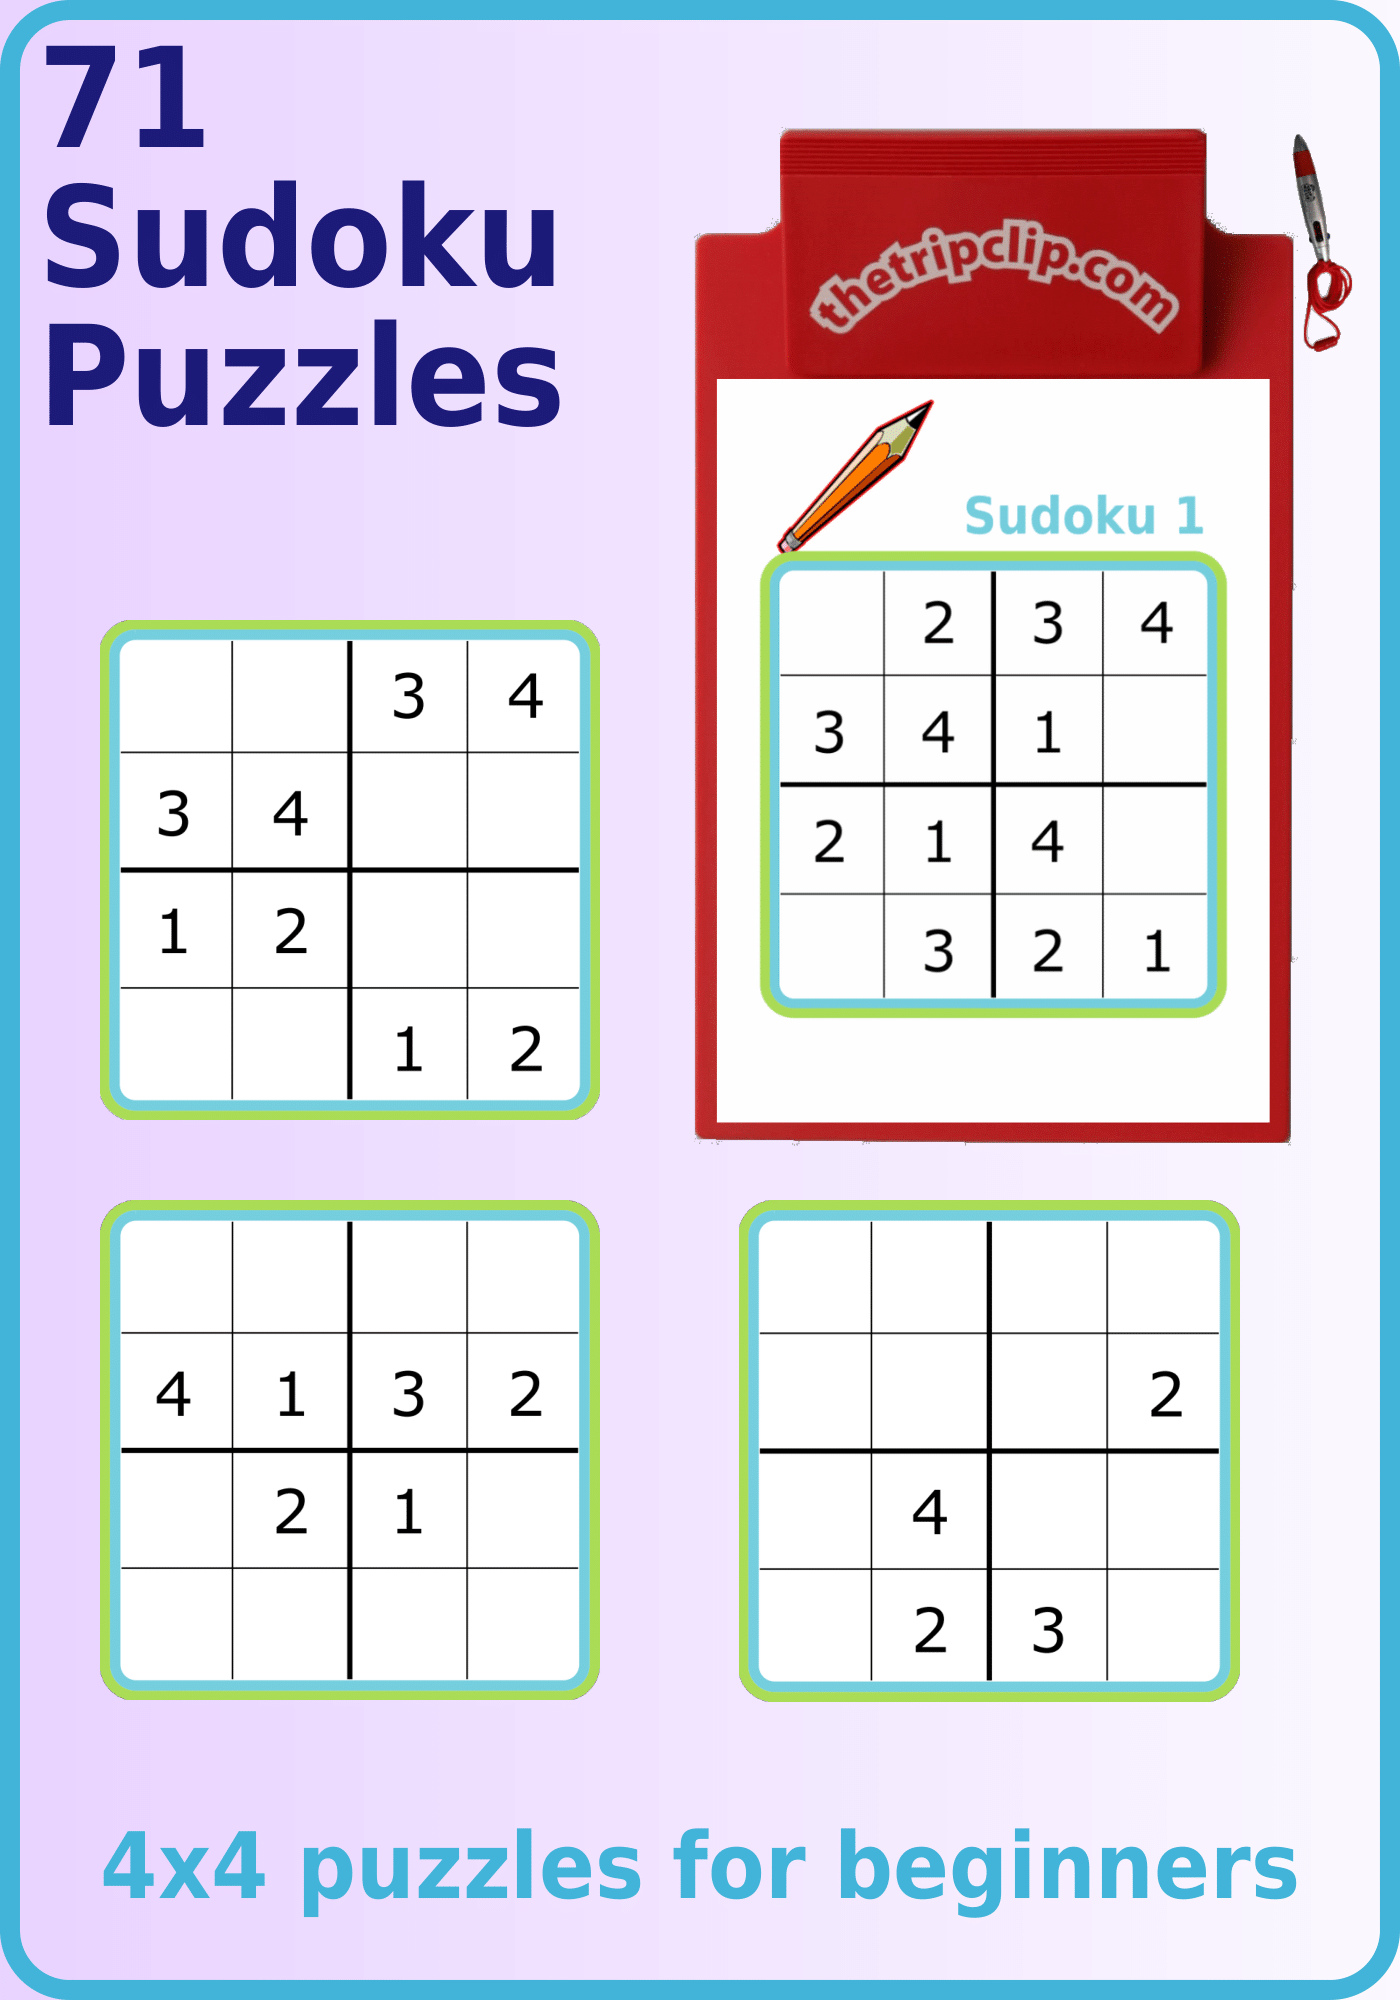 Four 4x4 sudoku puzzles, one on a kid-sized clipboards